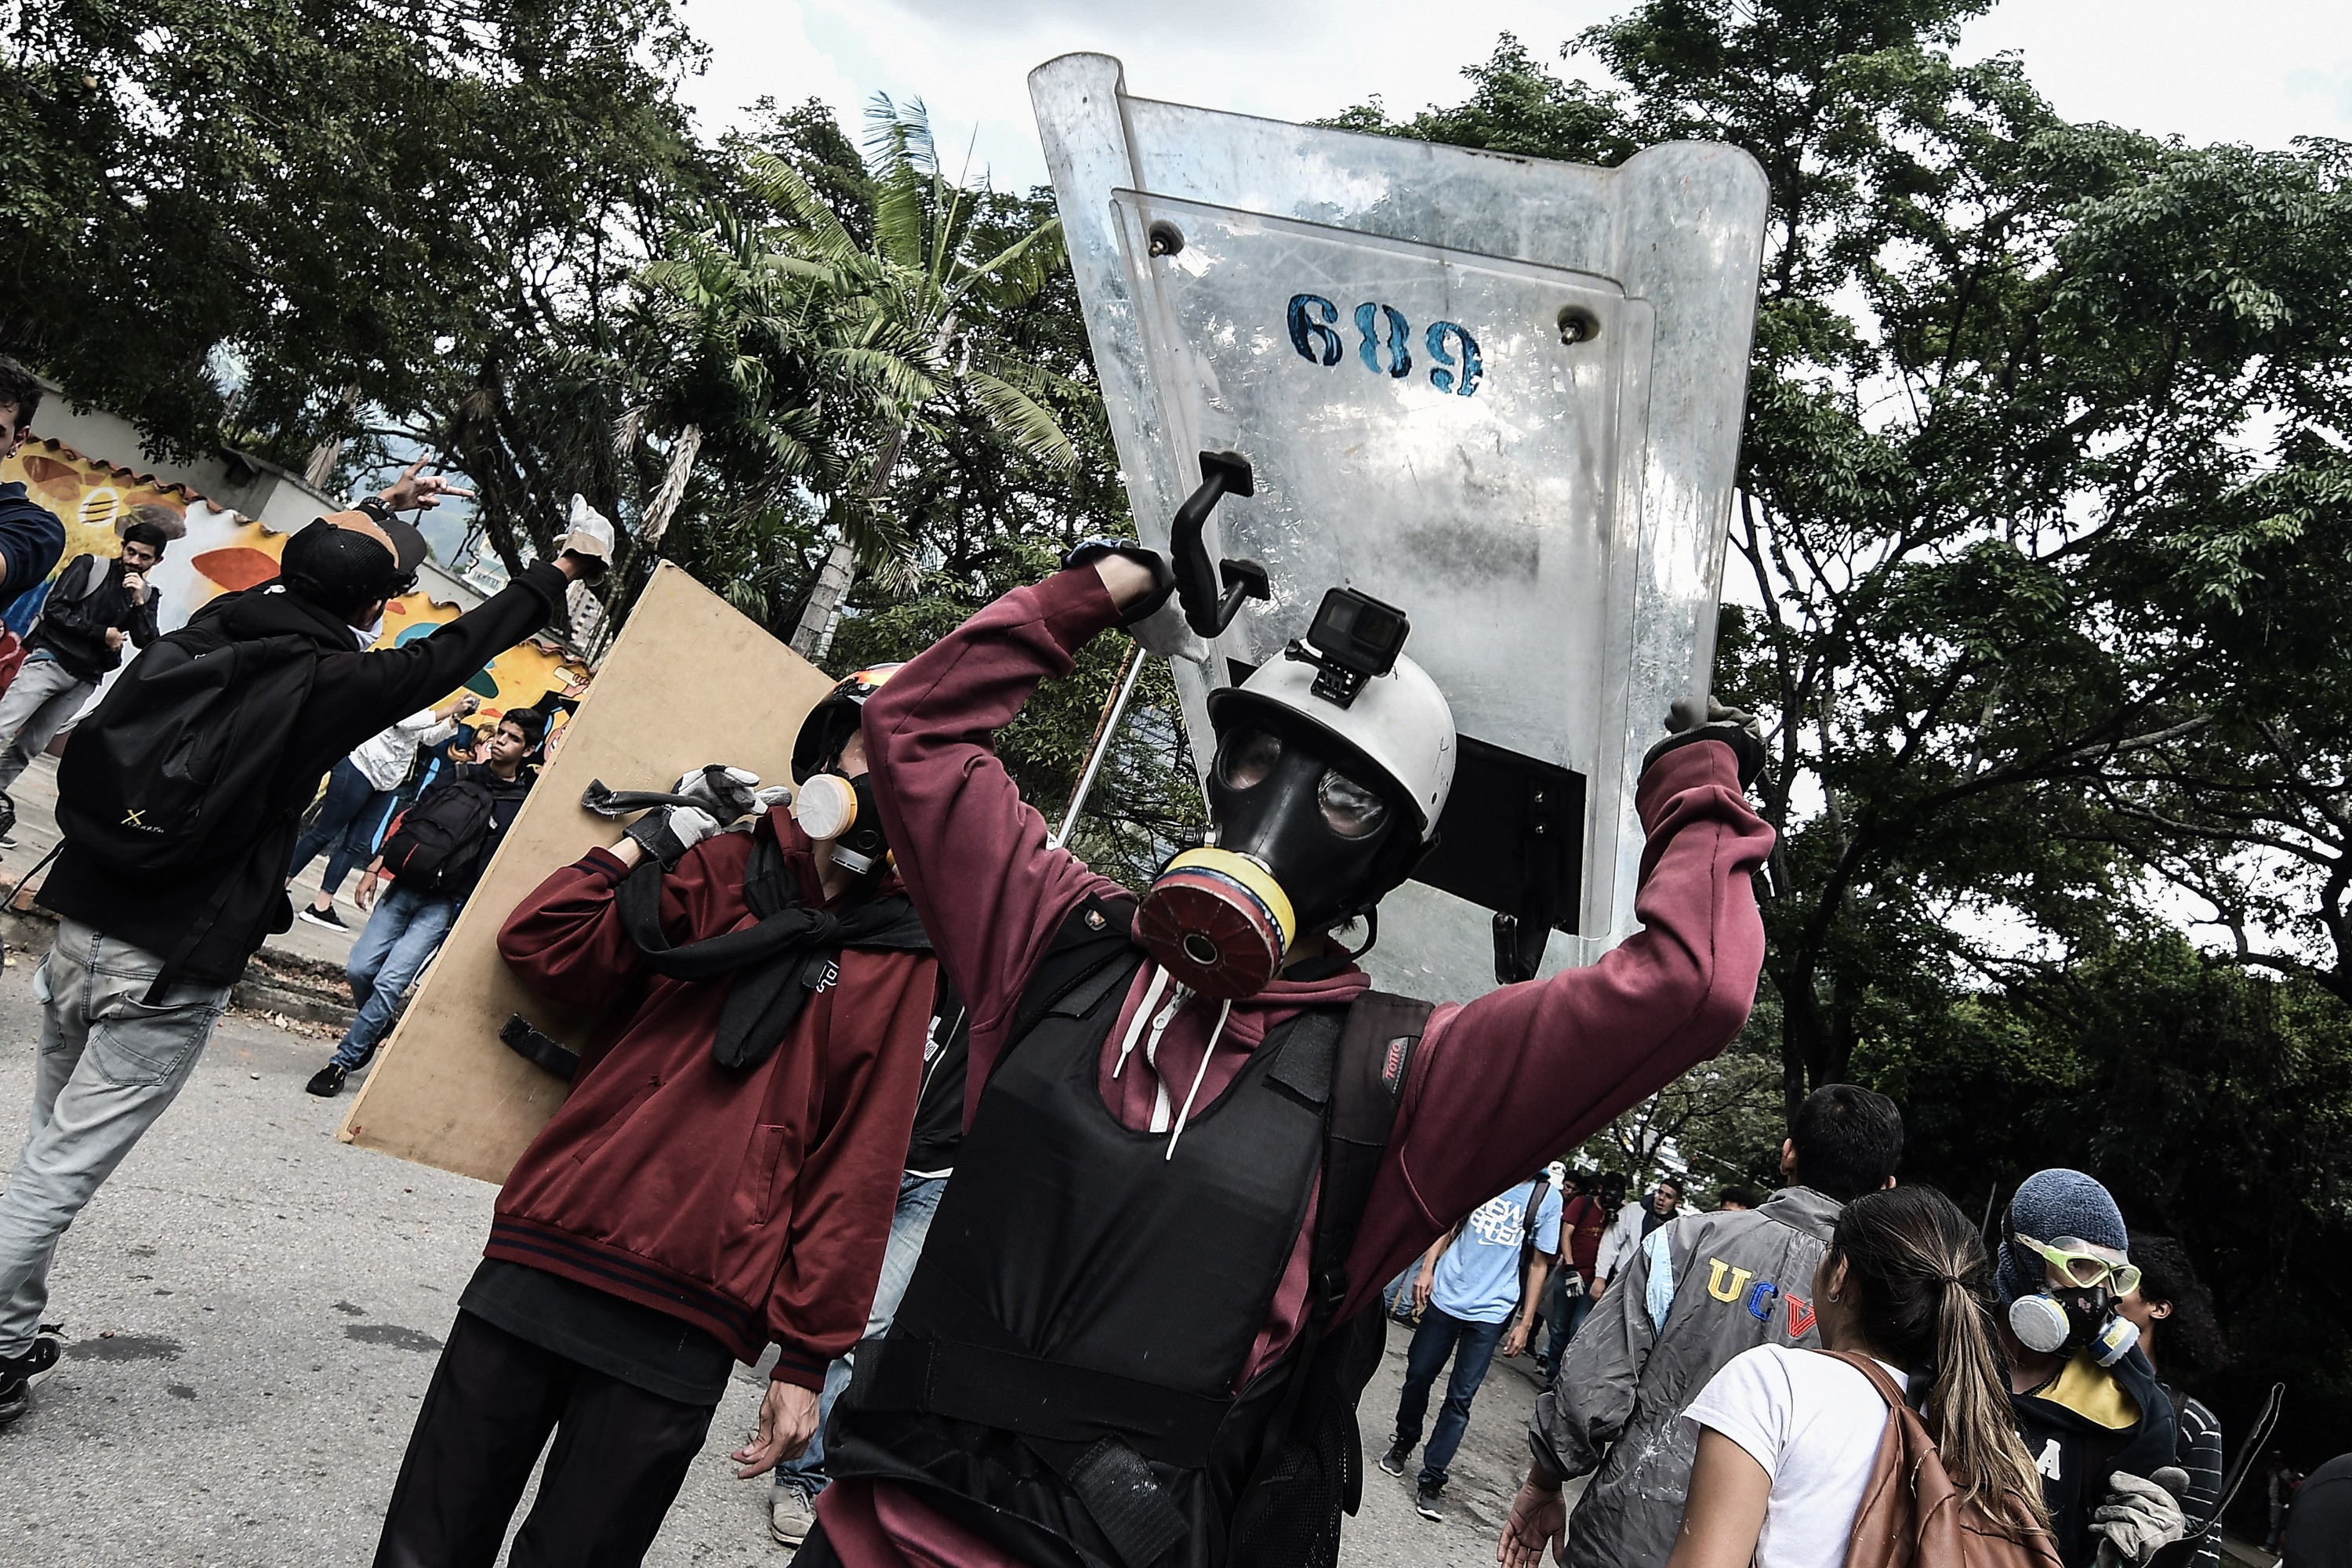 A protester with a riot shields and a gas mask during the demonstrations. Photo: SOPA Images via ZUMA Wire